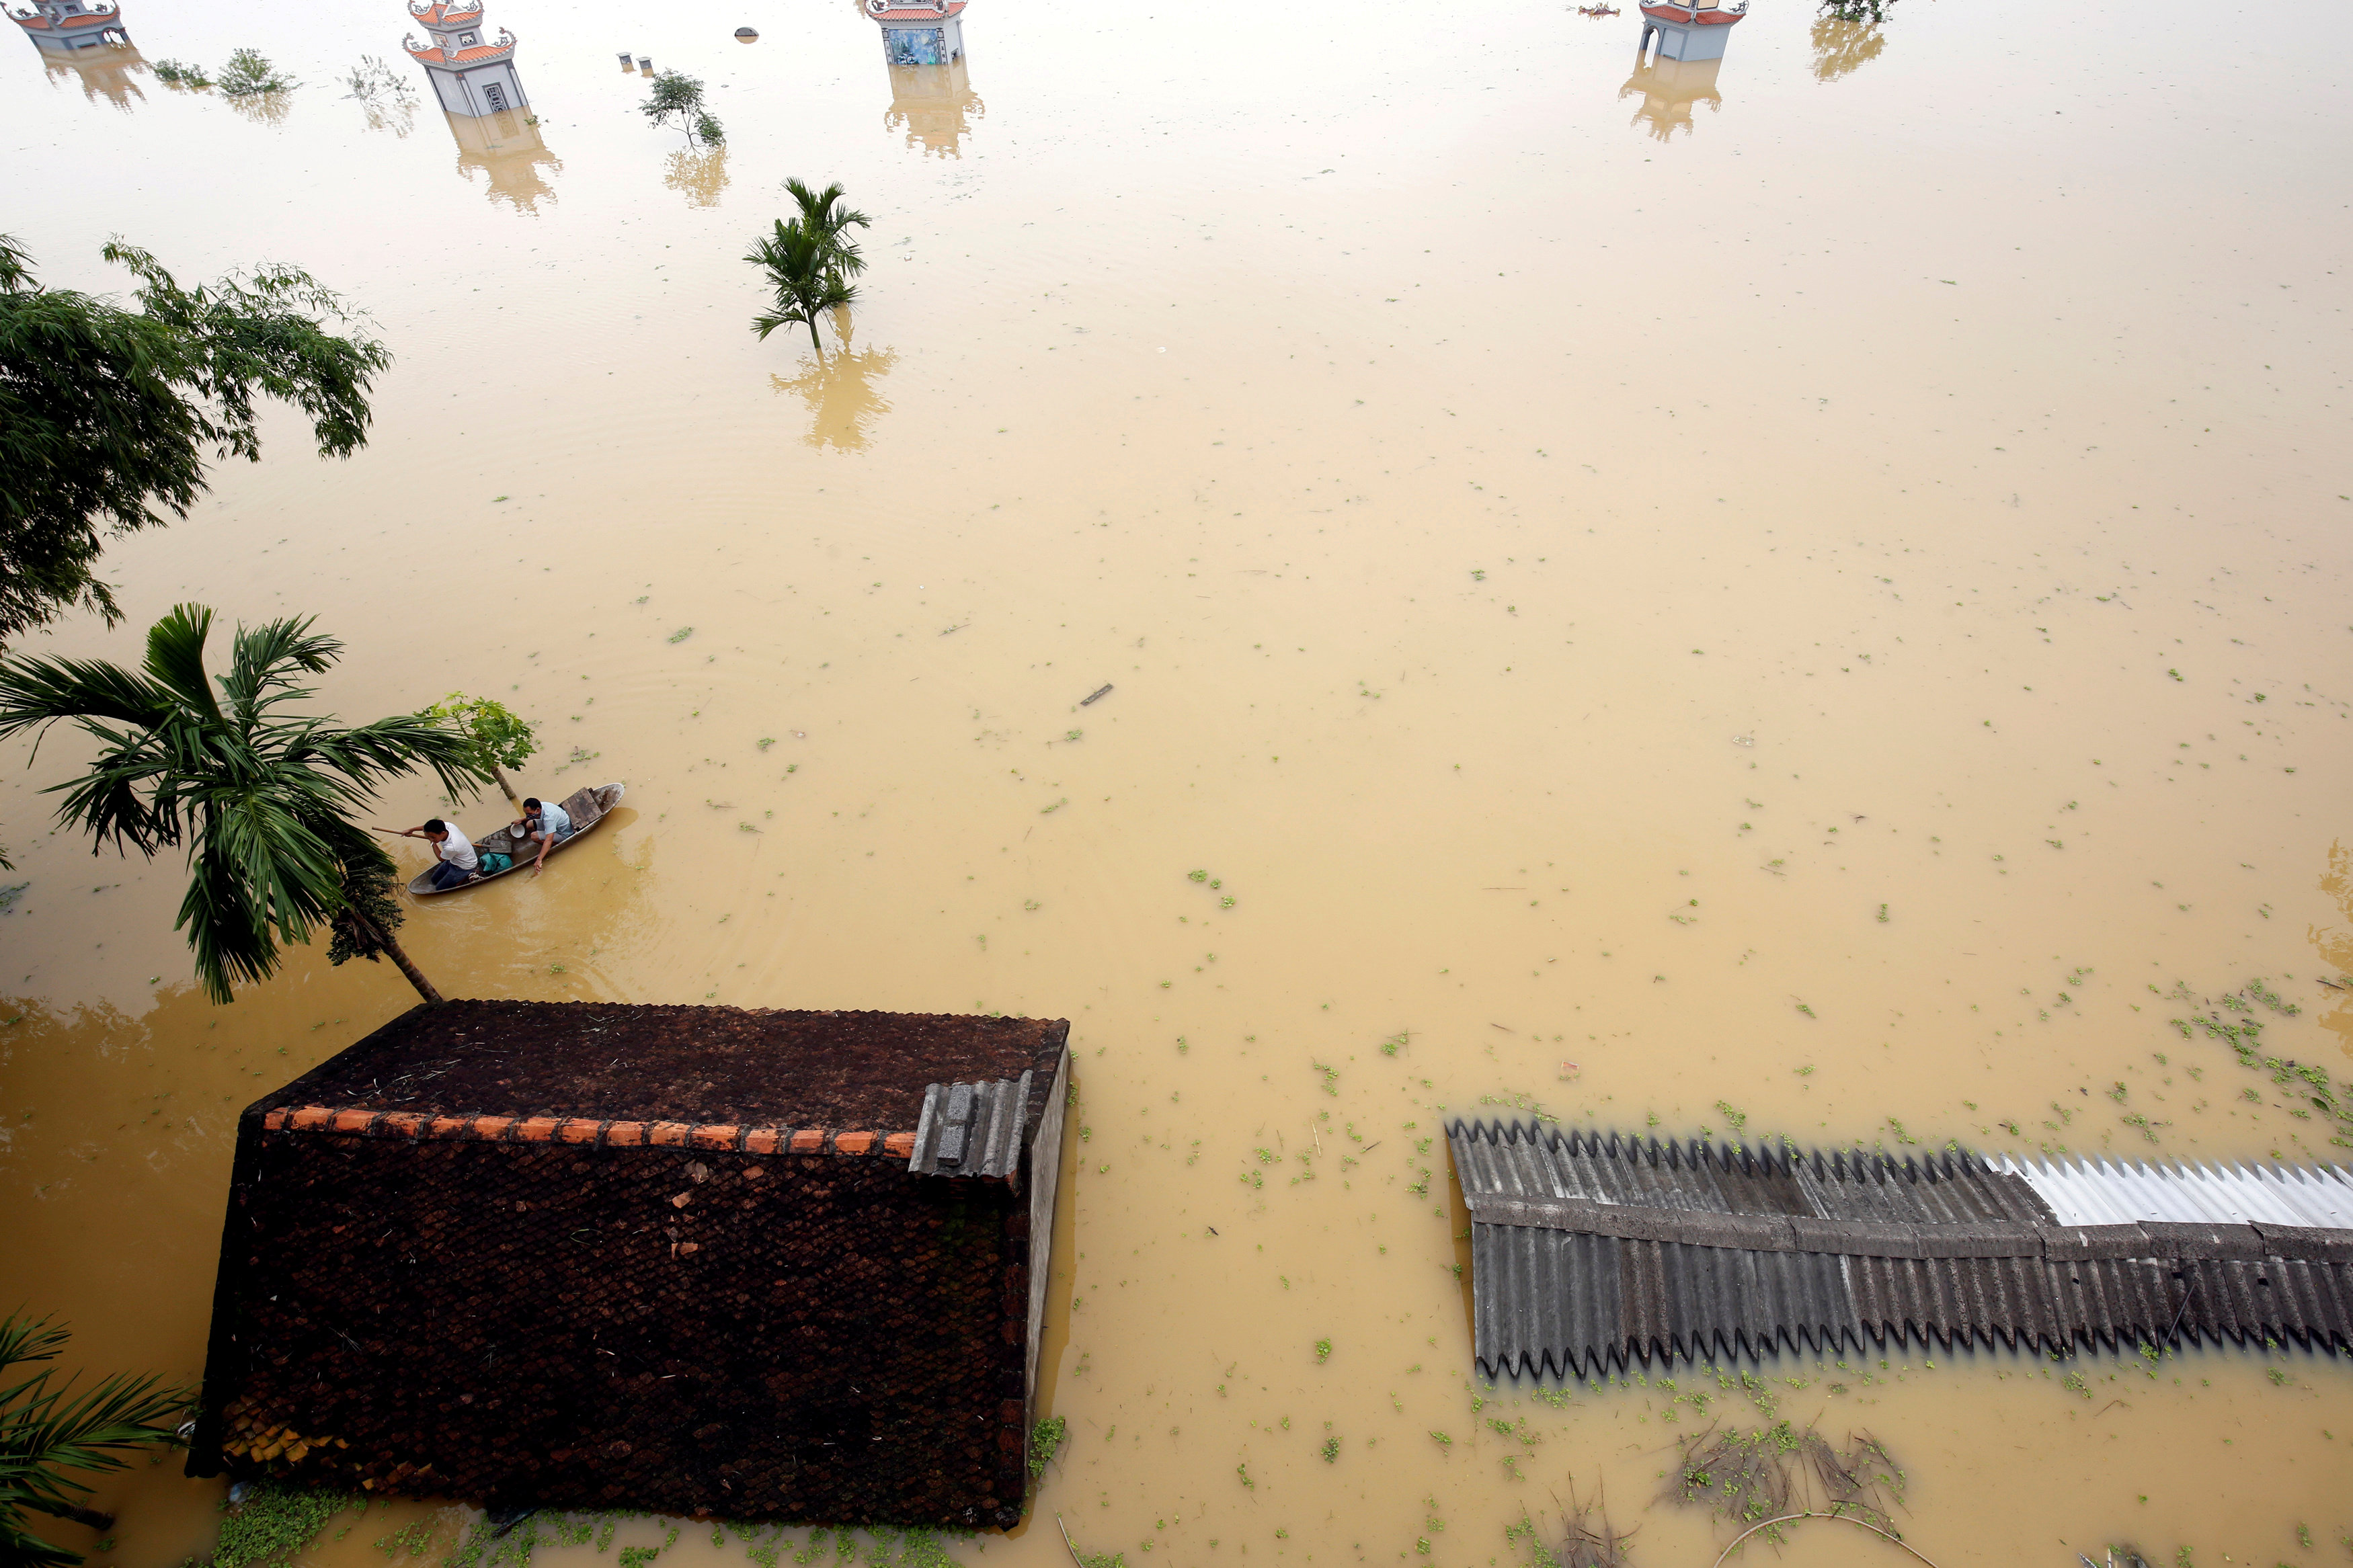 Farmers paddle in a boat at a flooded village after a tropical depression in Hanoi, Vietnam October 13, 2017. Photo: Reuters